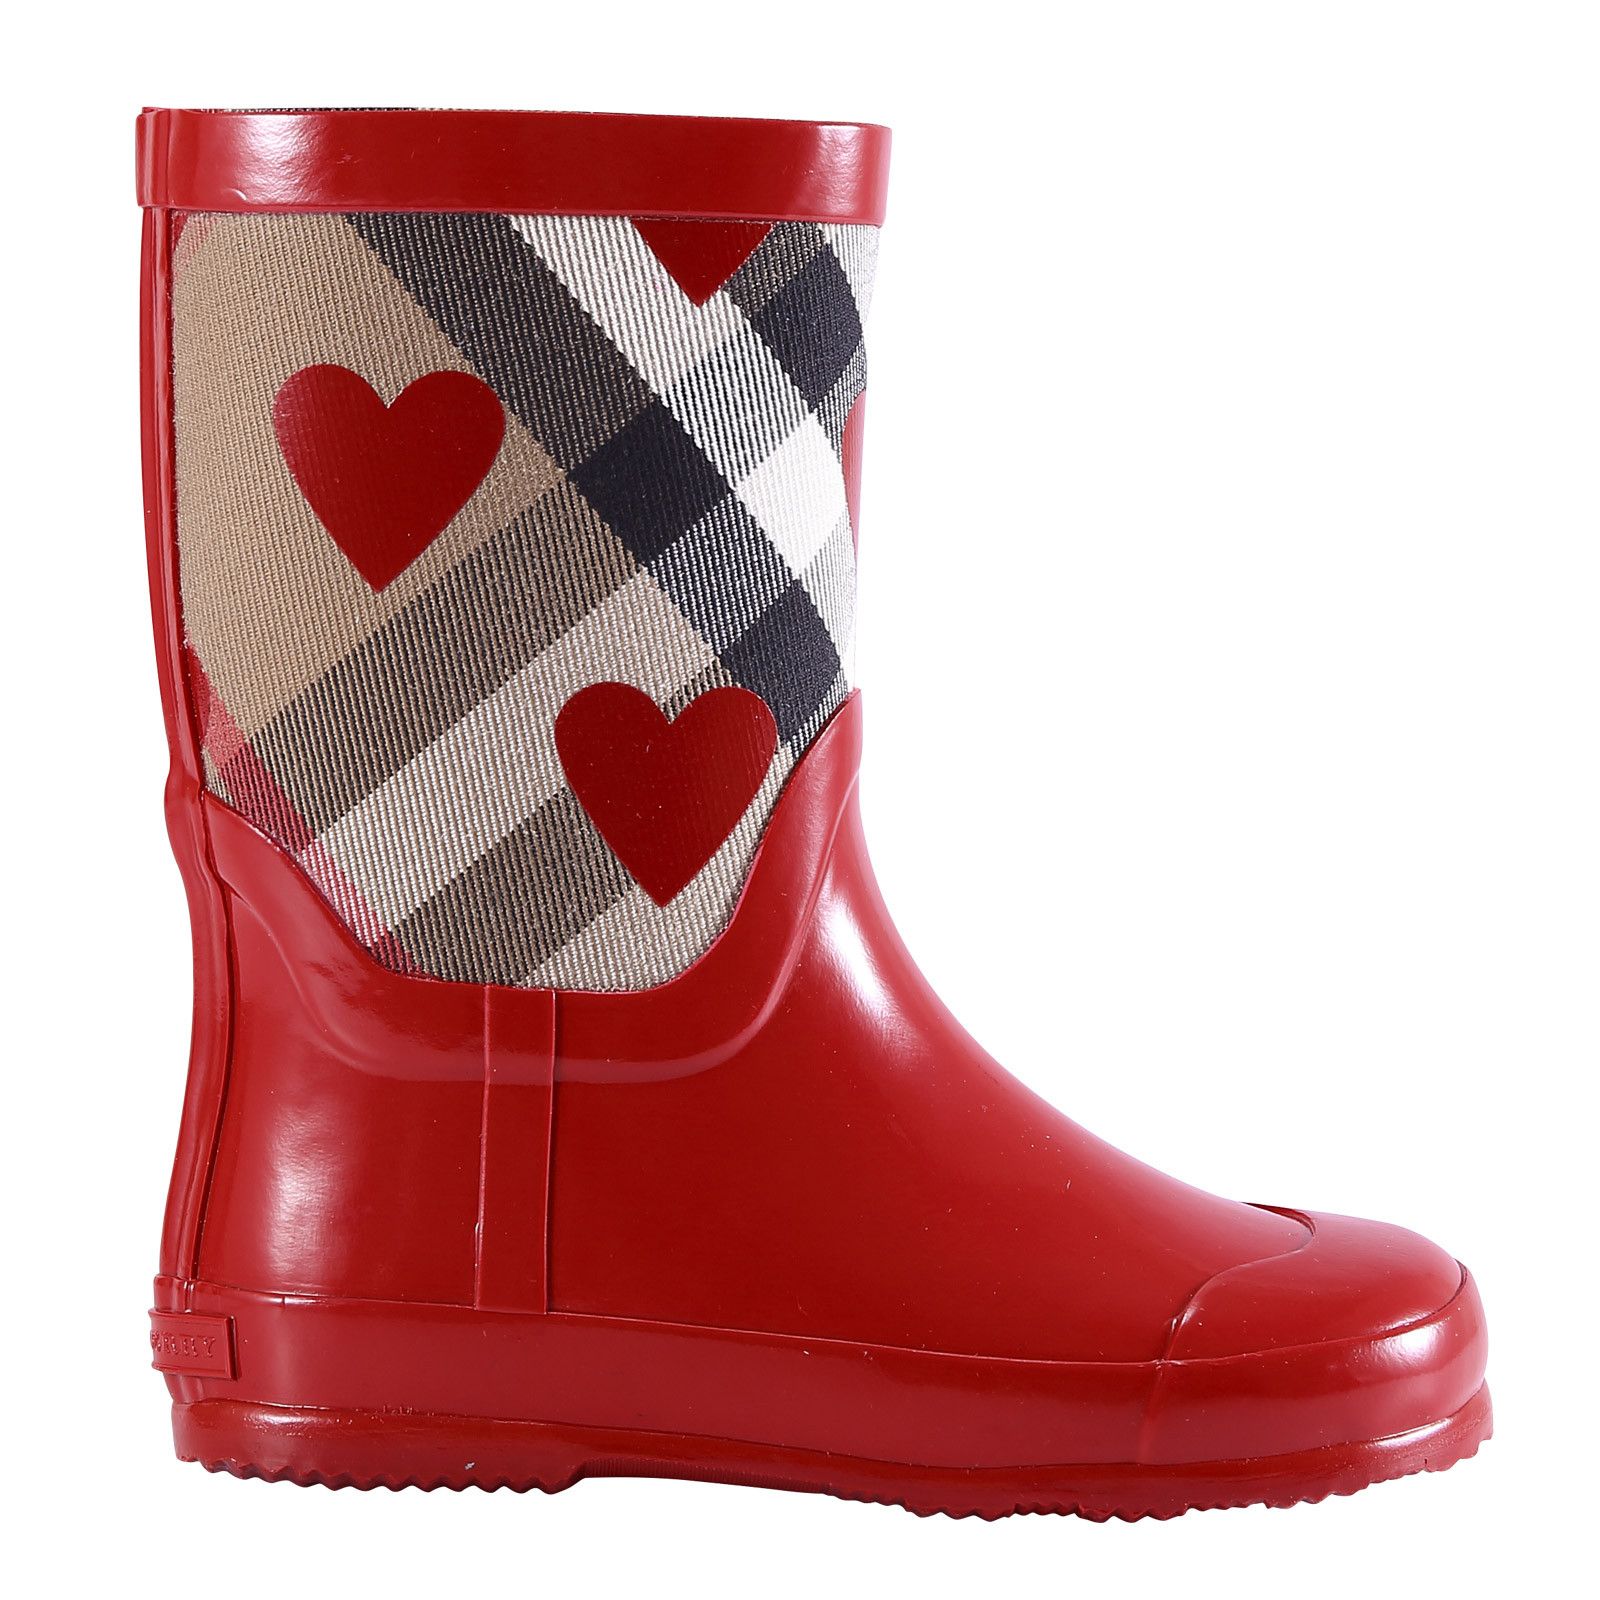 Baby Girls Red Rain Boots With House Check & Hearts - CÉMAROSE | Children's Fashion Store - 2